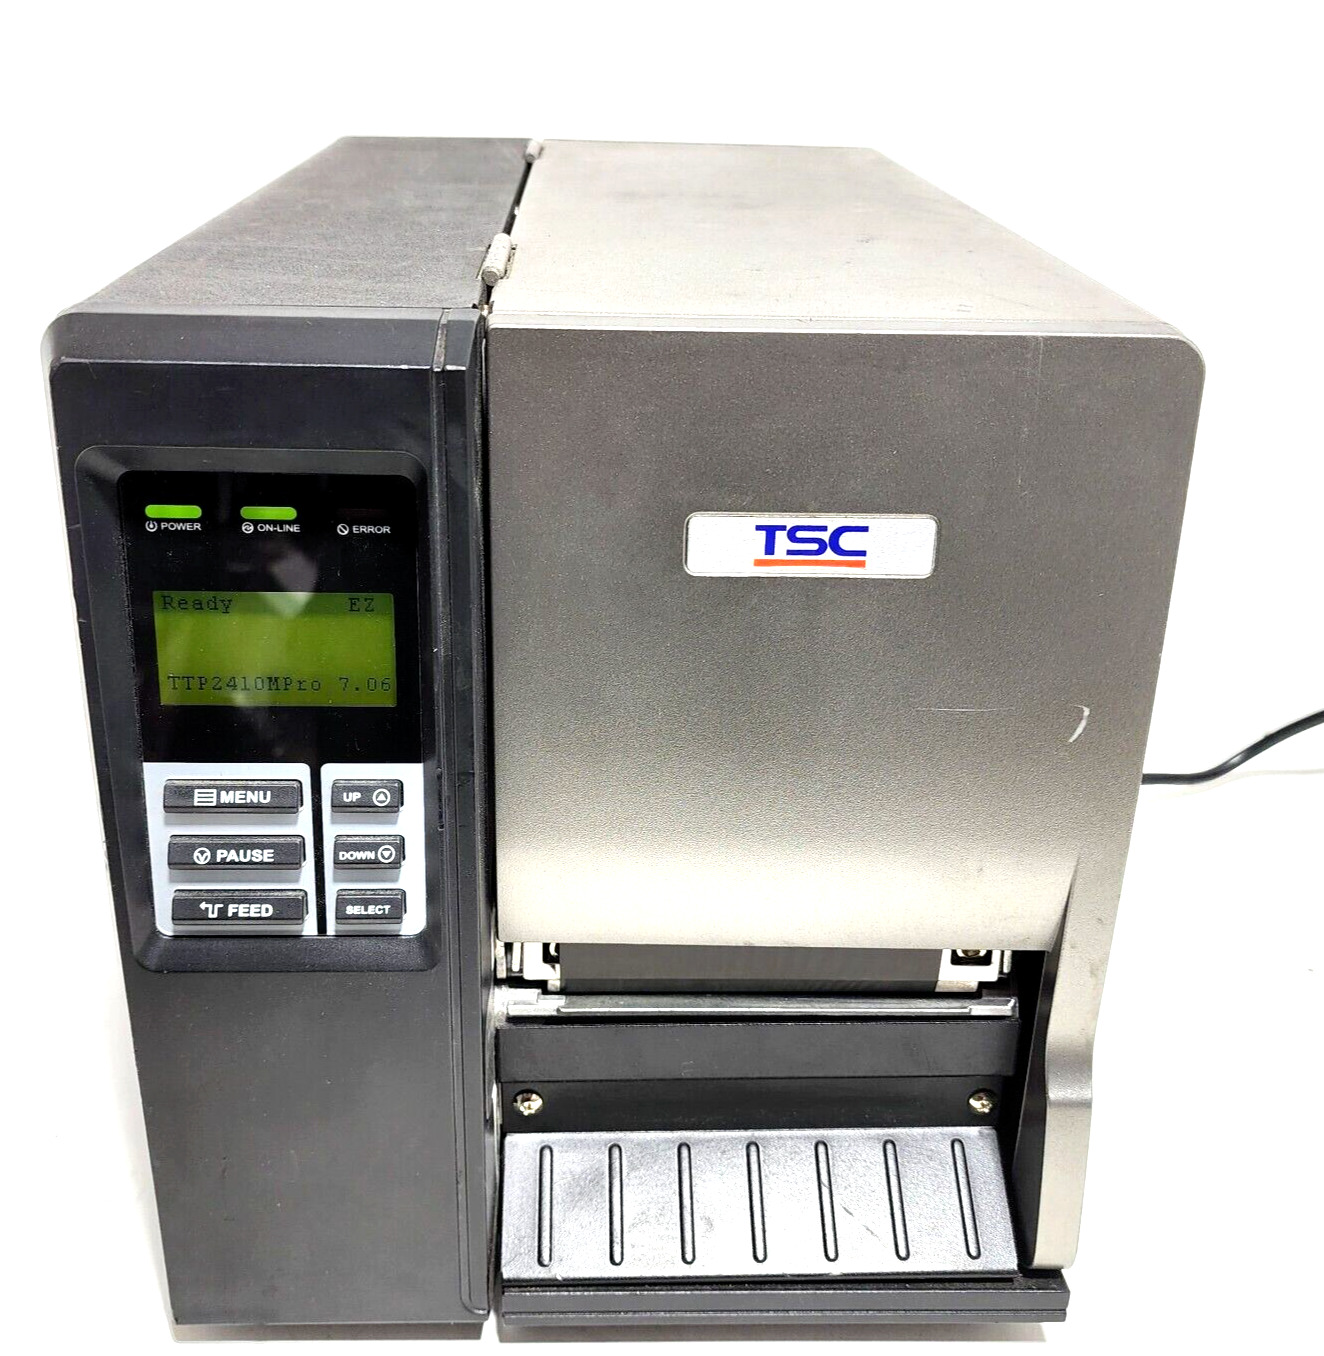 TSC TTP-2410M PRO BARCODE LABEL PRINTER USB SOLD AS IS